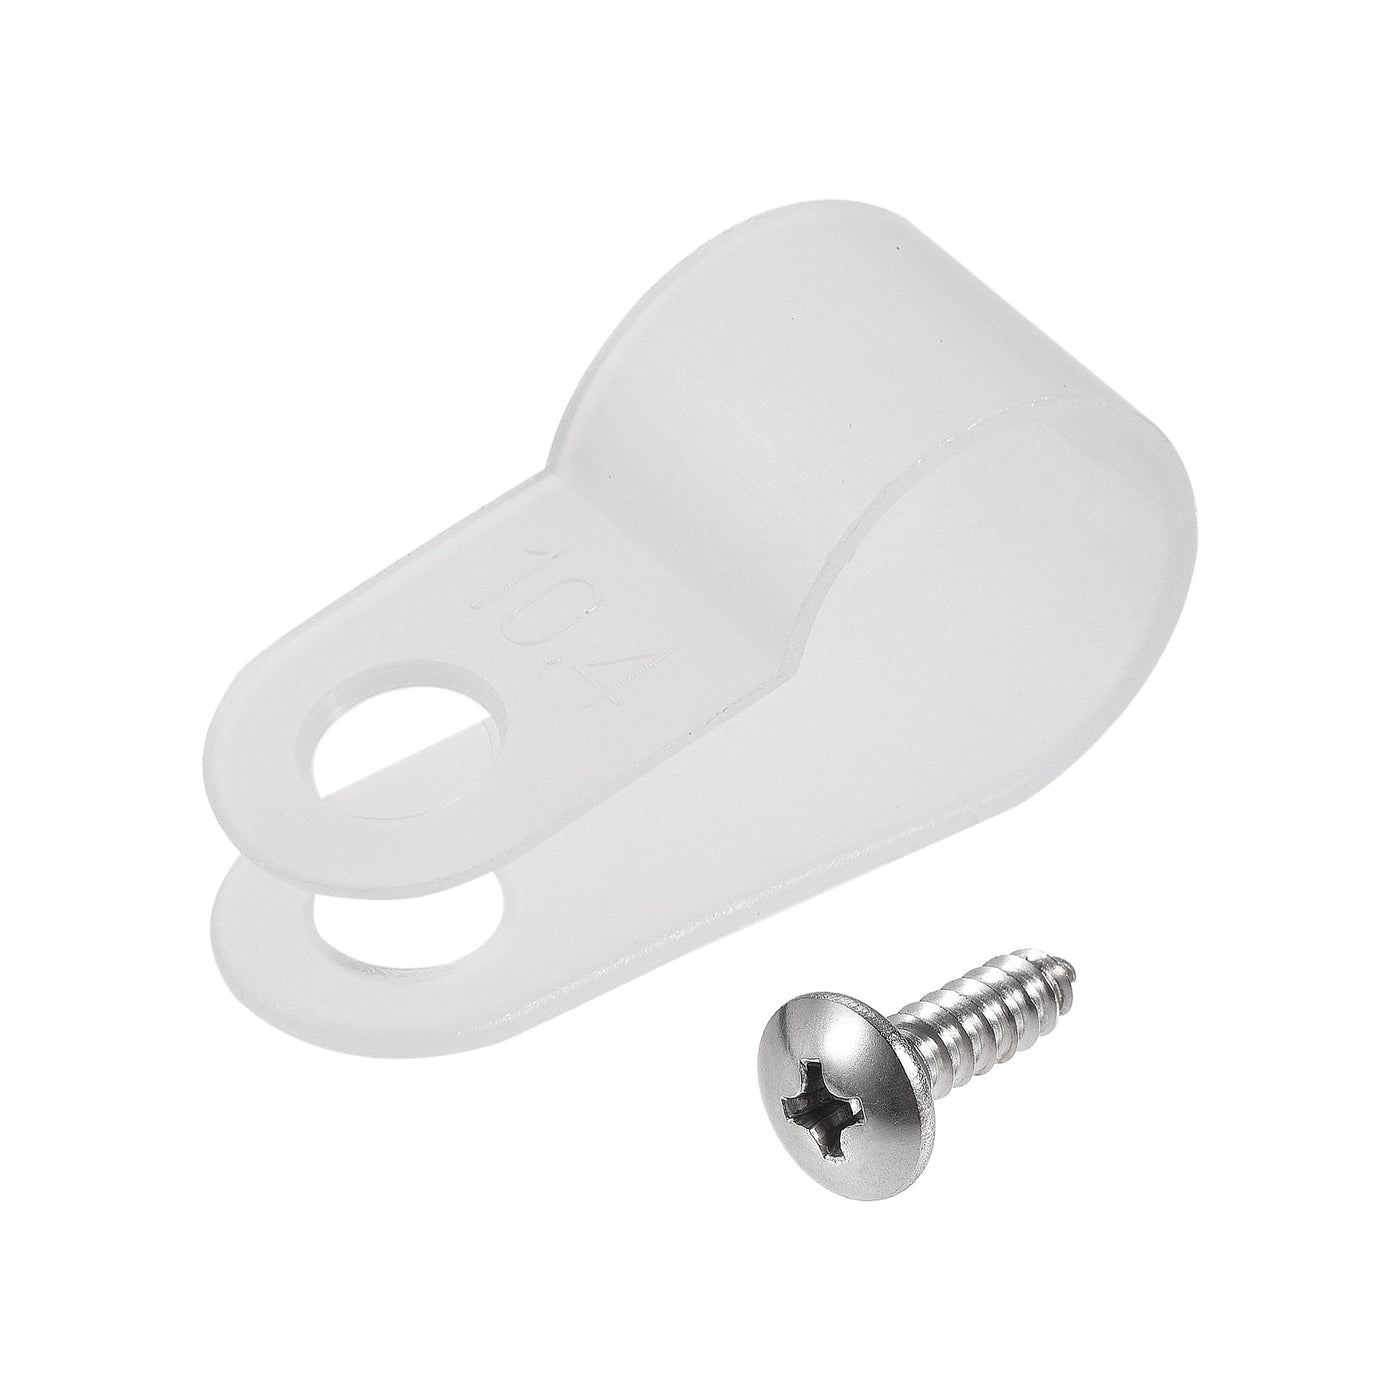 uxcell Uxcell 10.4mm Nylon R Type Cable Clip Wire Clamp with Screws White 100 Set